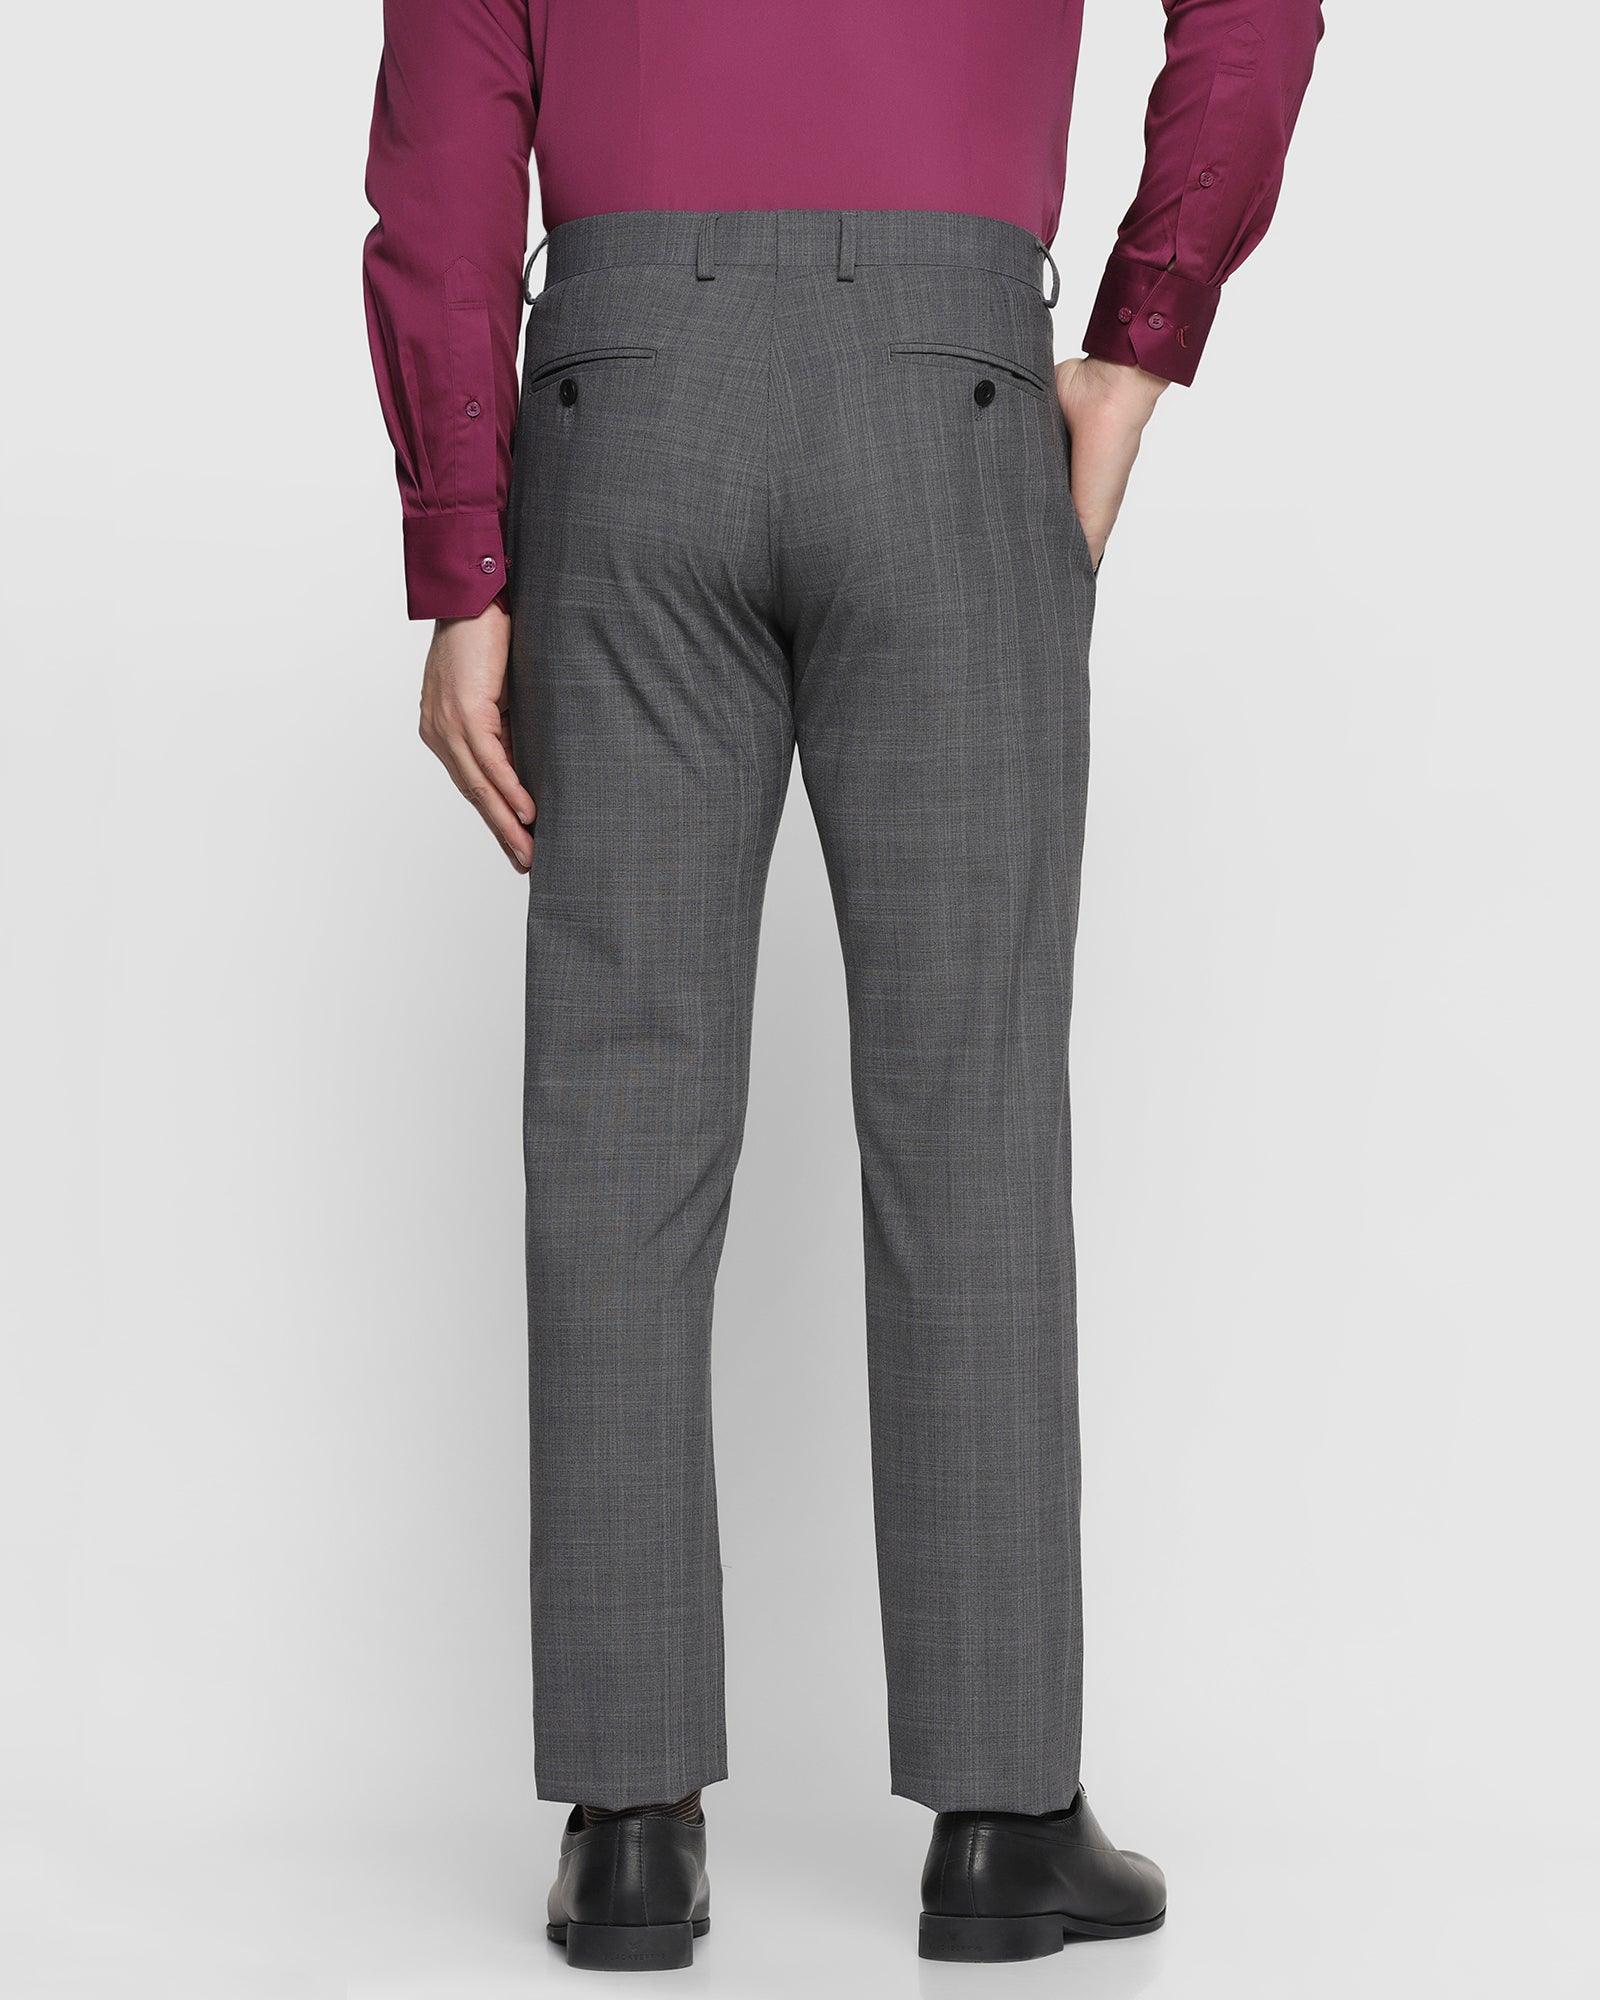 Cotton Mens Check Formal Pant at Rs 425 in Kanpur | ID: 20620779273